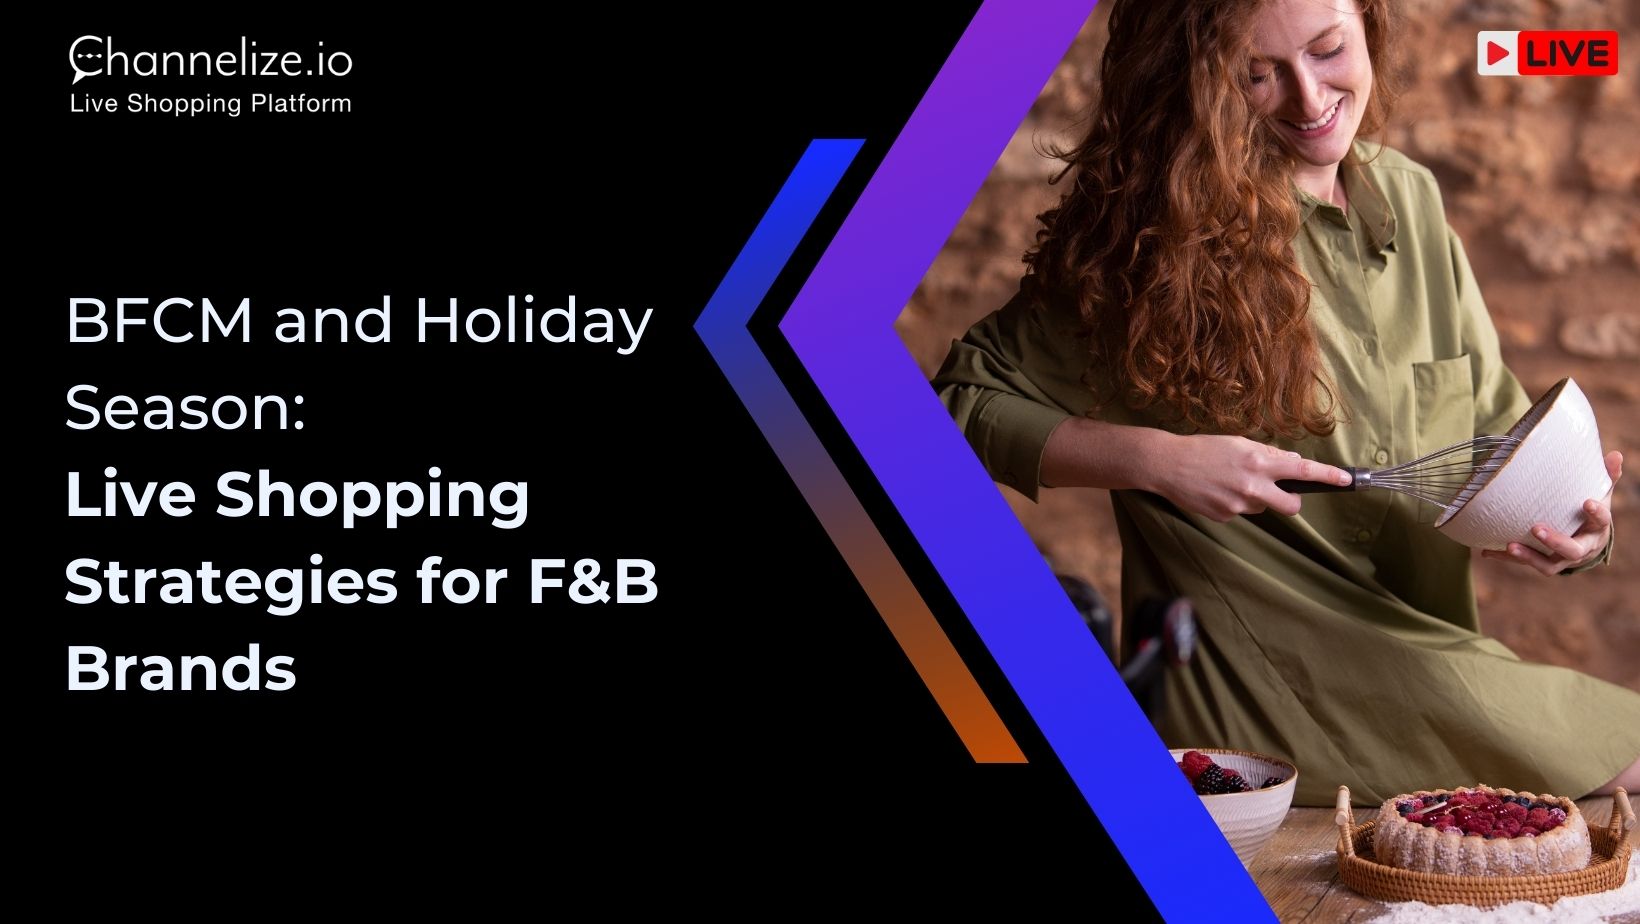 BFCM and Holiday Season – Live Shopping Strategies for F&B Brands